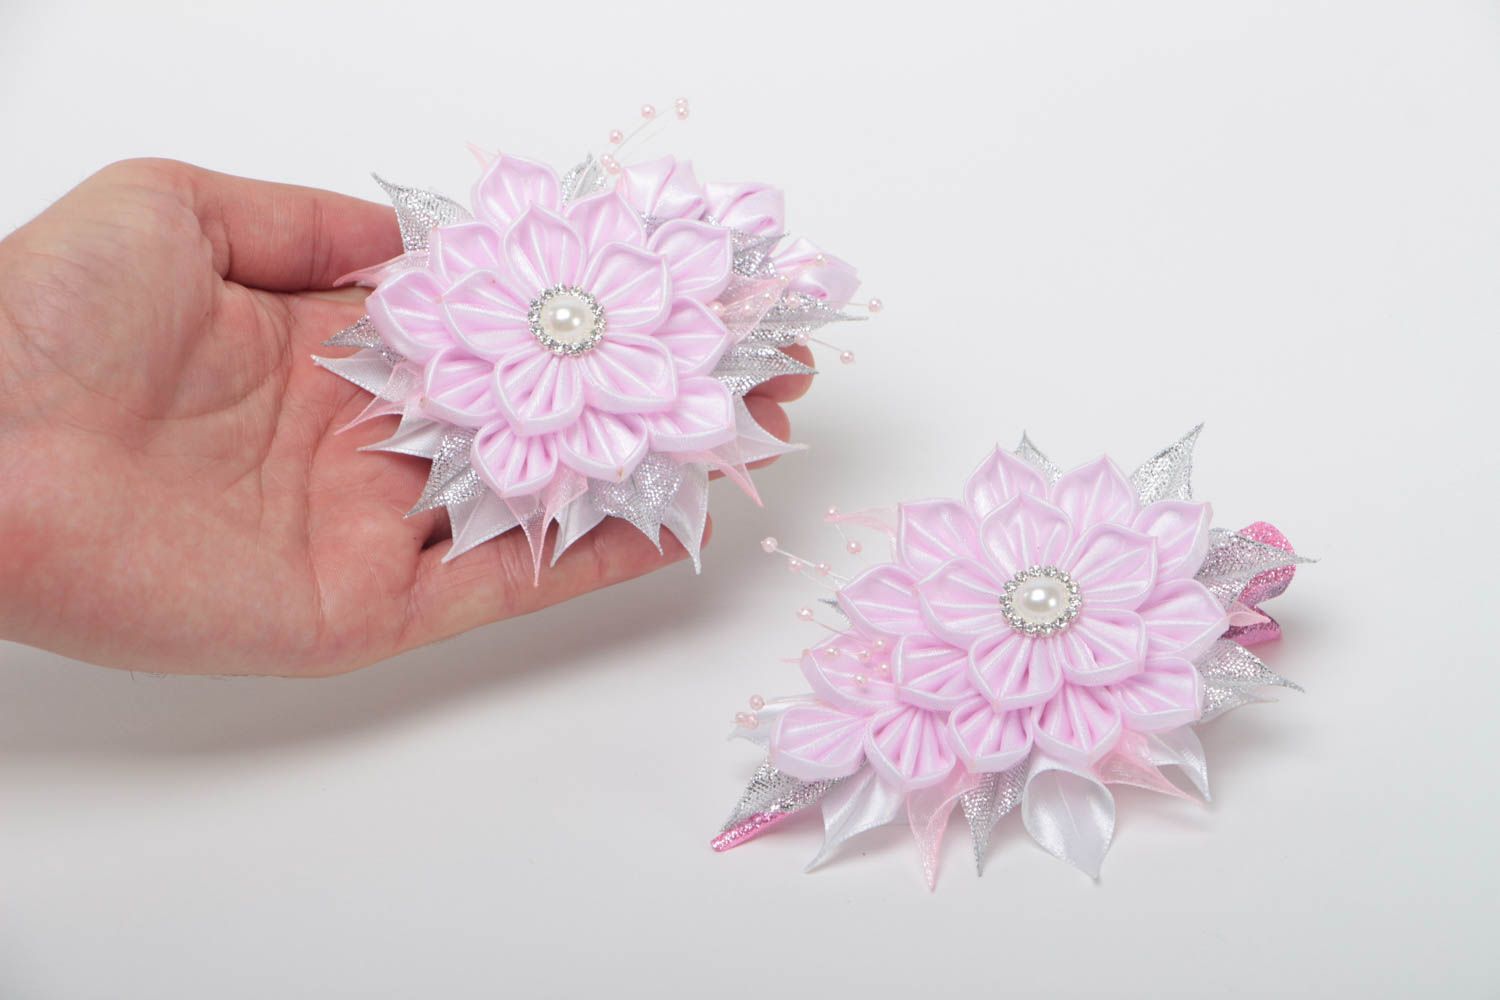 Set of accessories handmade textile flower brooch and barrette gift ideas photo 5